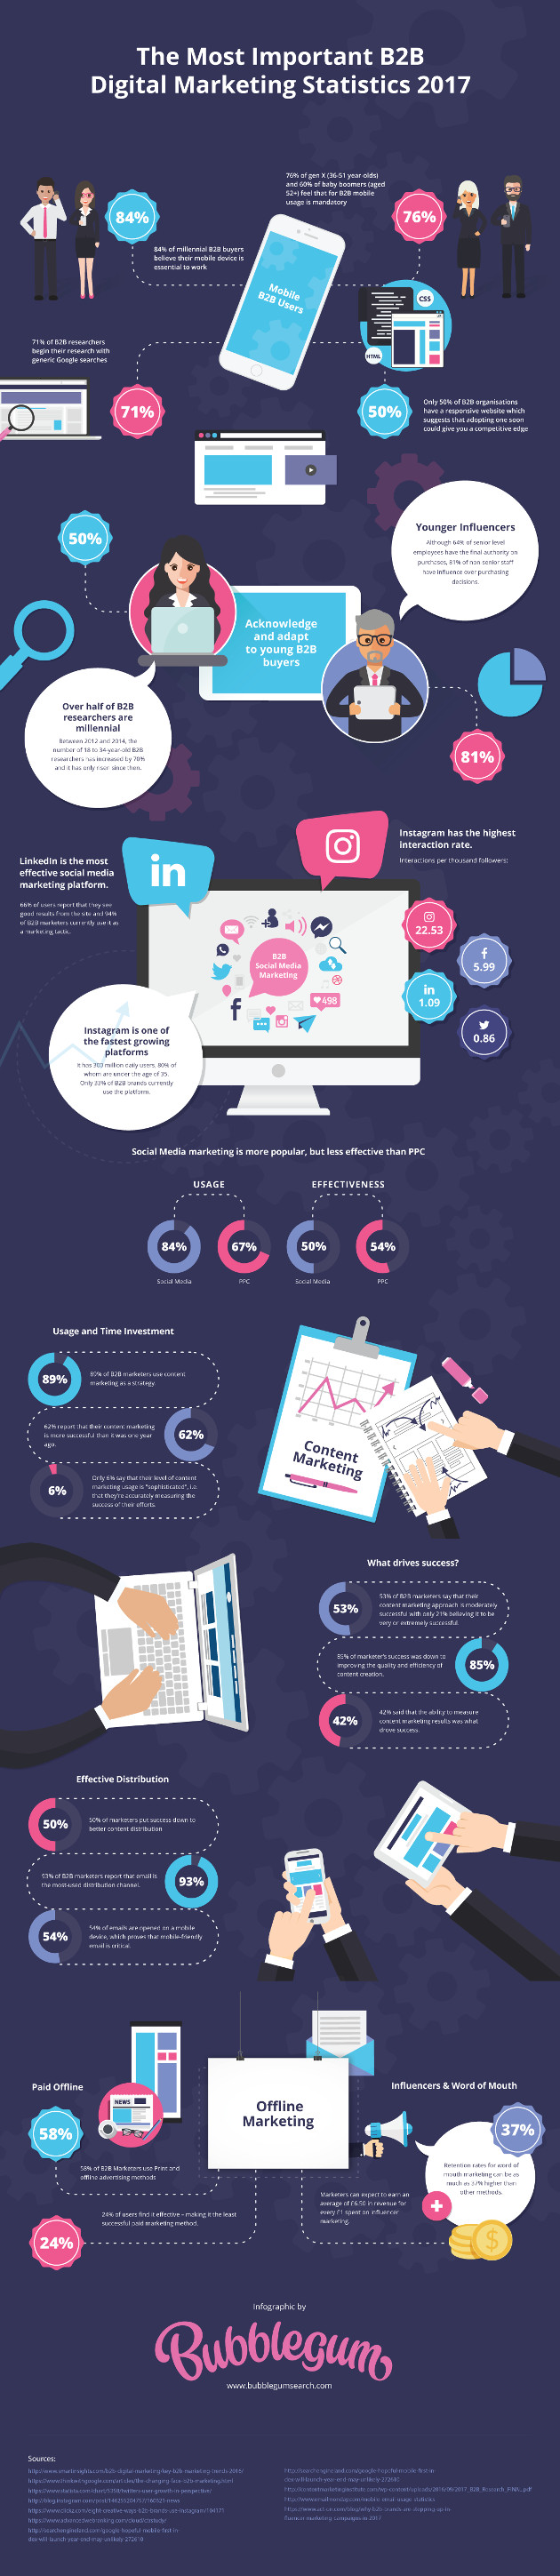 B2B Digital Marketing Trends and Stats of 2017 [Infographic]